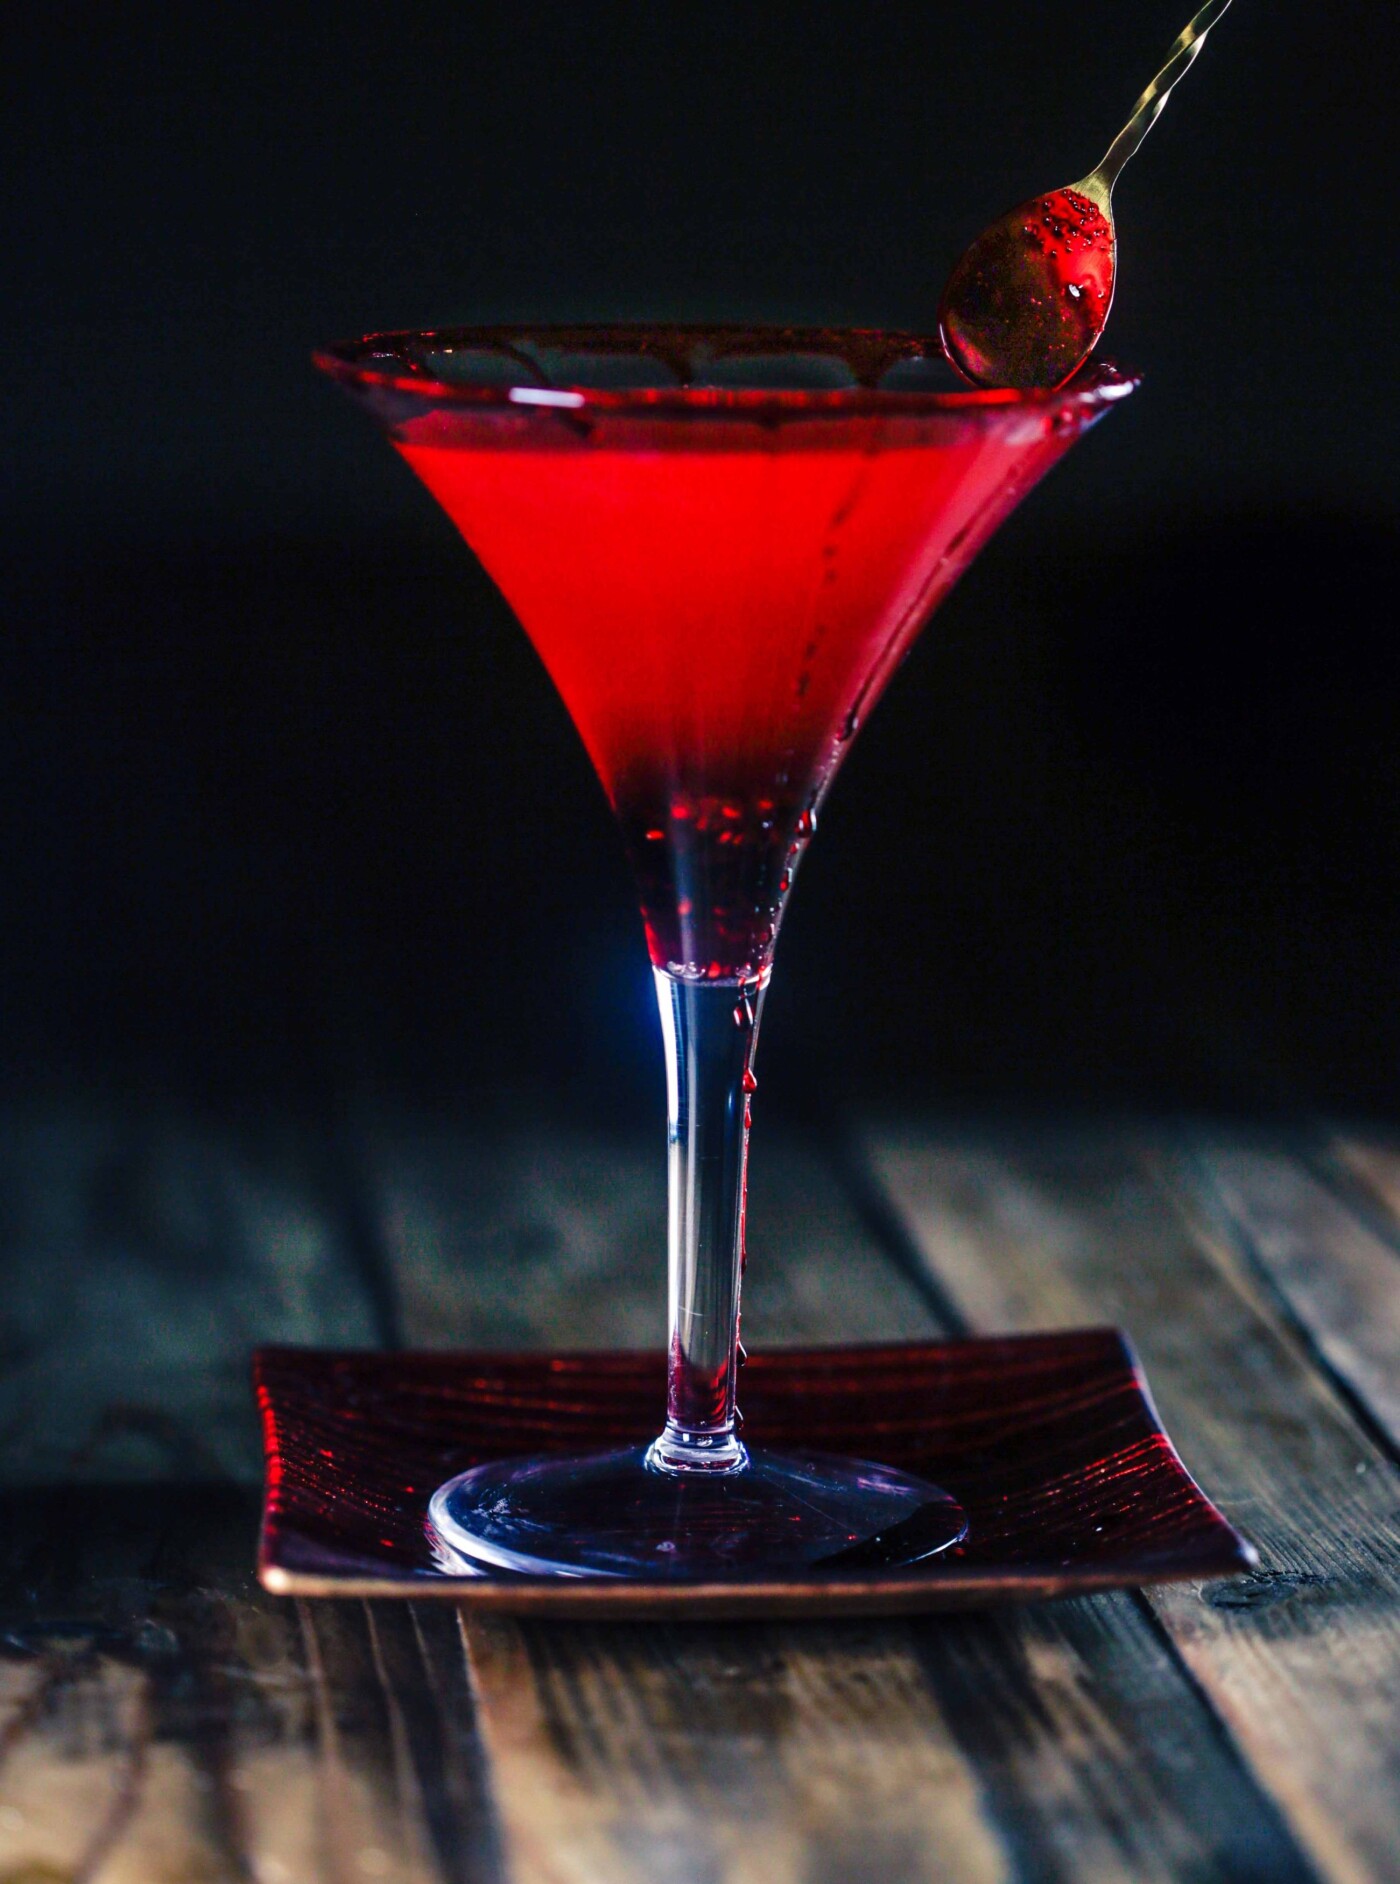 This is a hand crafted martini created by craft mixologist Tara Salinas. Ingredients include vodka, raspberry pureè, sparkling blood orange juice, a candied orange and a rim of movie blood; which is corn syrup and red food coloring. This particular cocktail is from a series of drinks that were themed after each season of "American Horror Story". This beverage is a representation of season 5 "Hotel". The series was shot for a food blog that can be found here: https://tvdinners.me